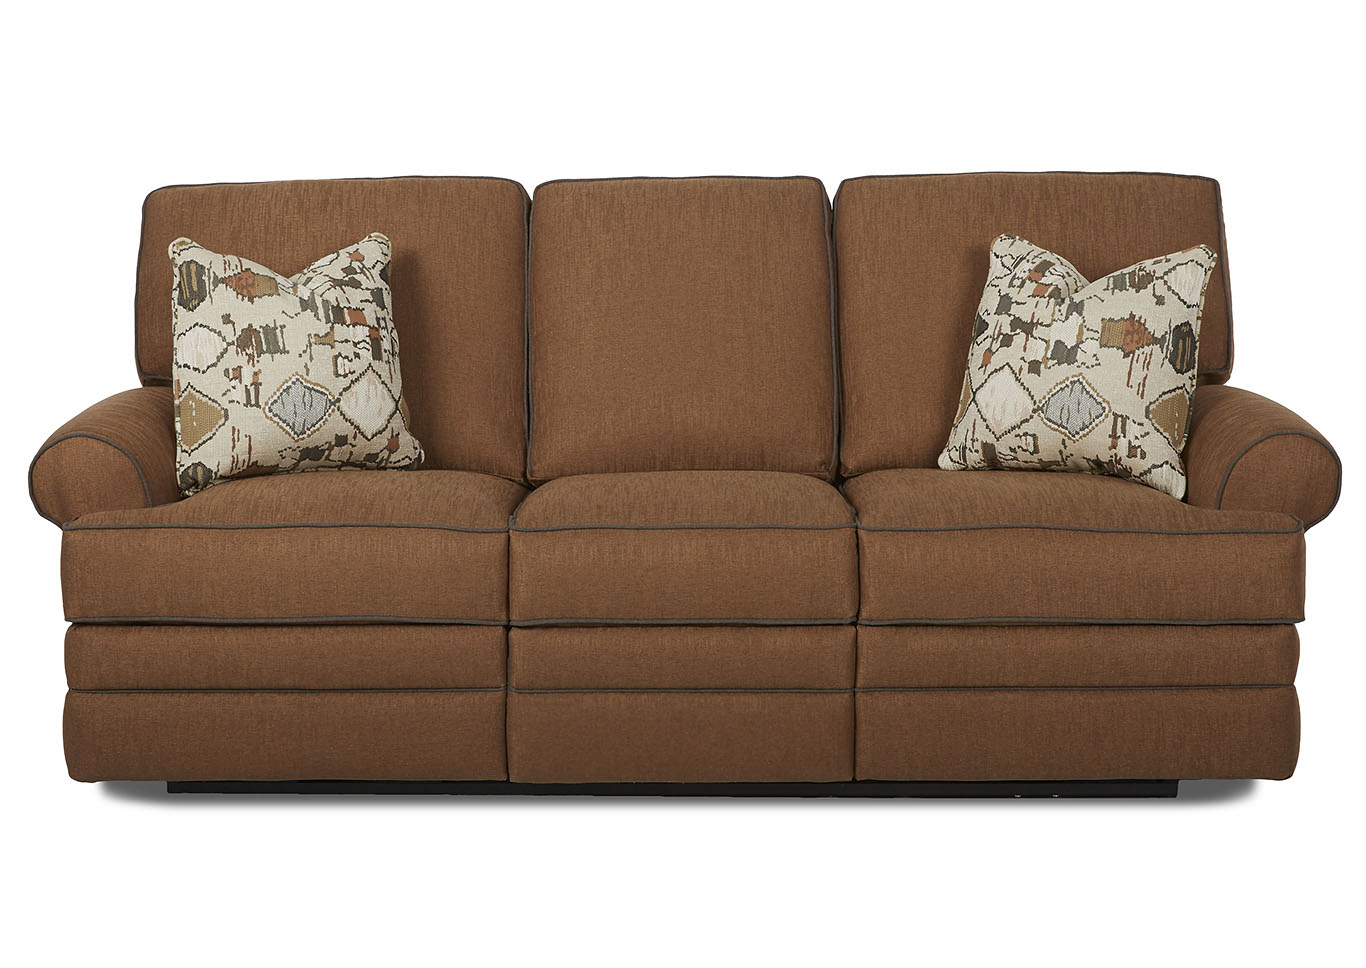 Belleview Rich Brown Power Reclining Fabric Sofa,Klaussner Home Furnishings